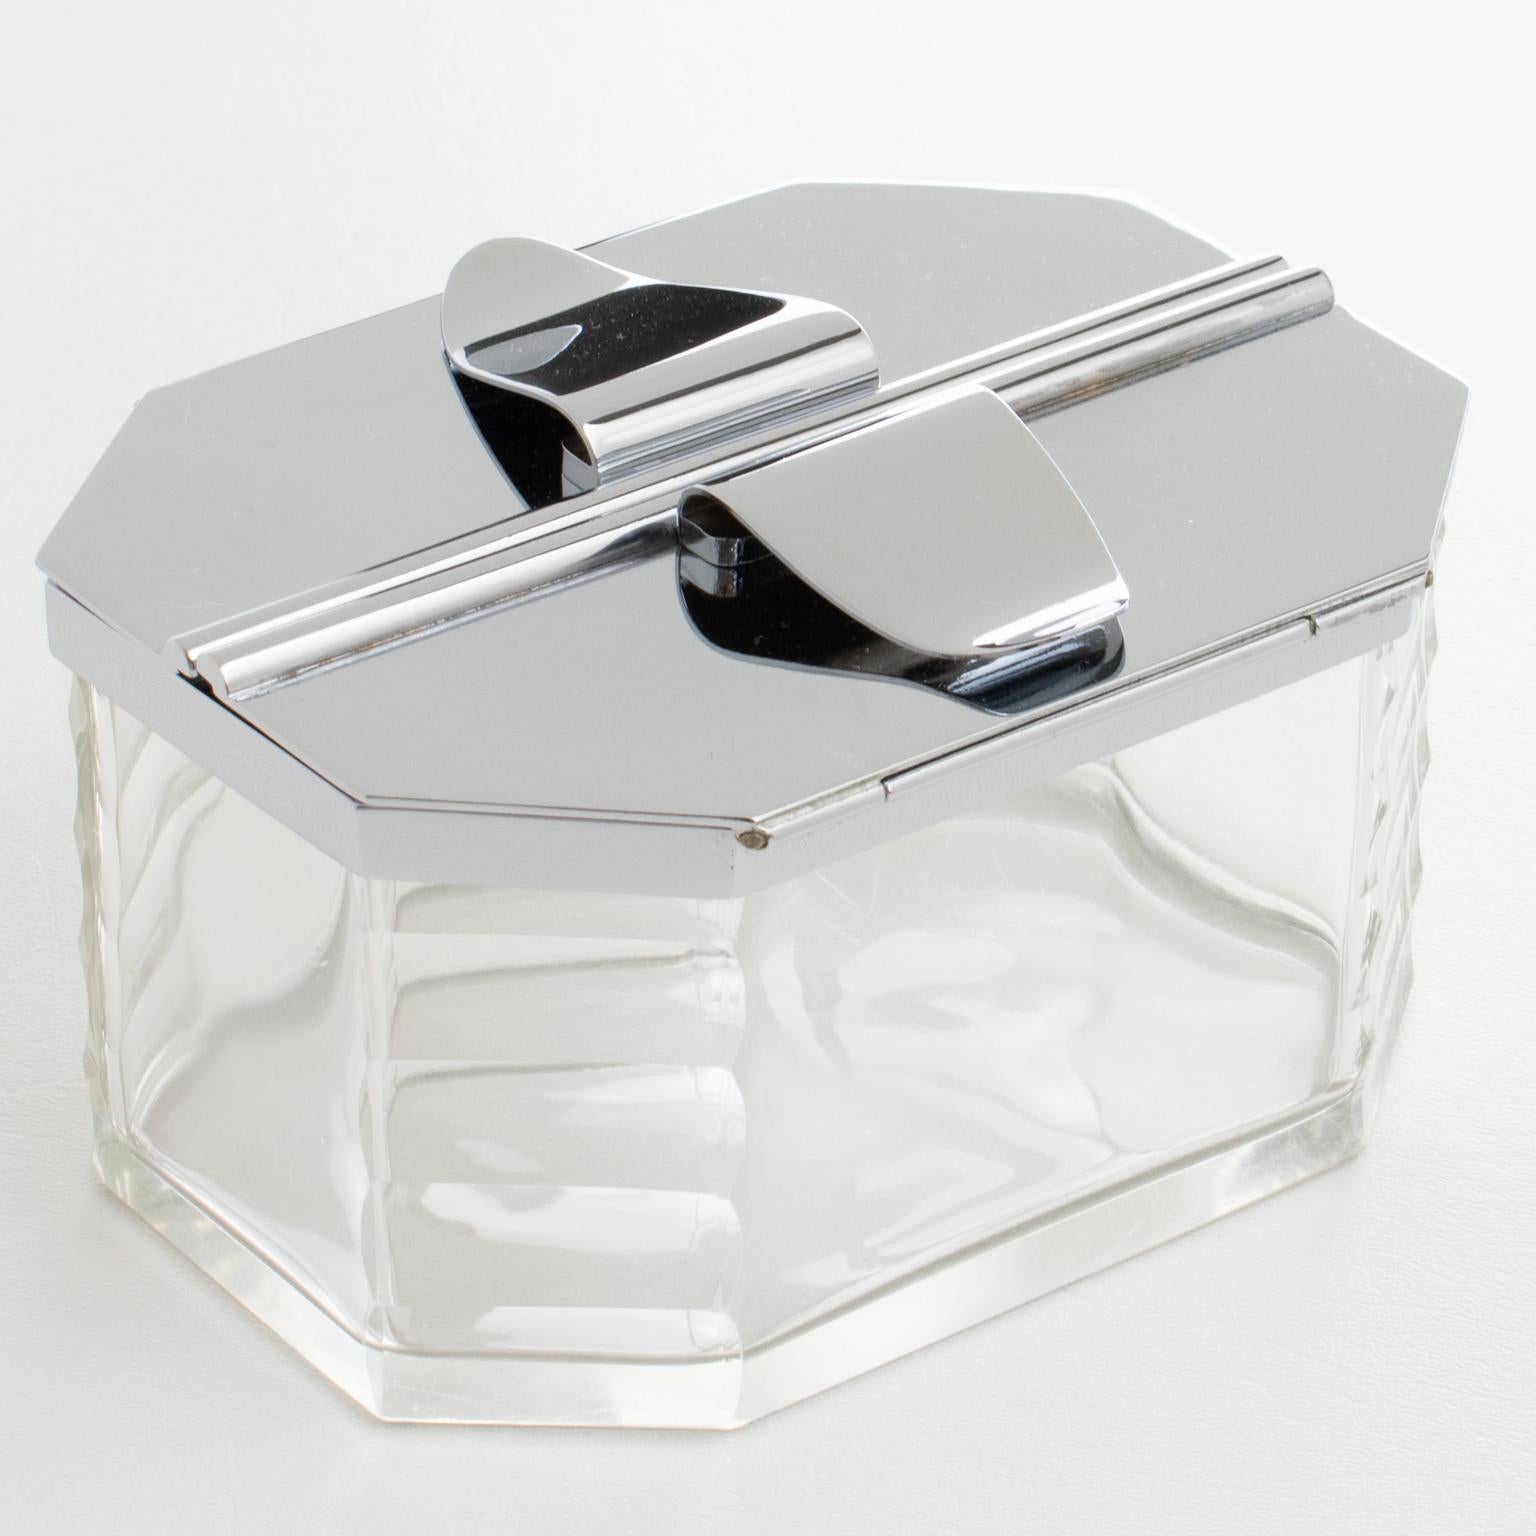 French silversmith Francois Frionnet, Paris, designed and crafted this elegant Art Deco chrome and crystal decorative cookie box in the 1930s. The modernist and minimalist design boasts a geometric hand-blown and crystal container with beveling